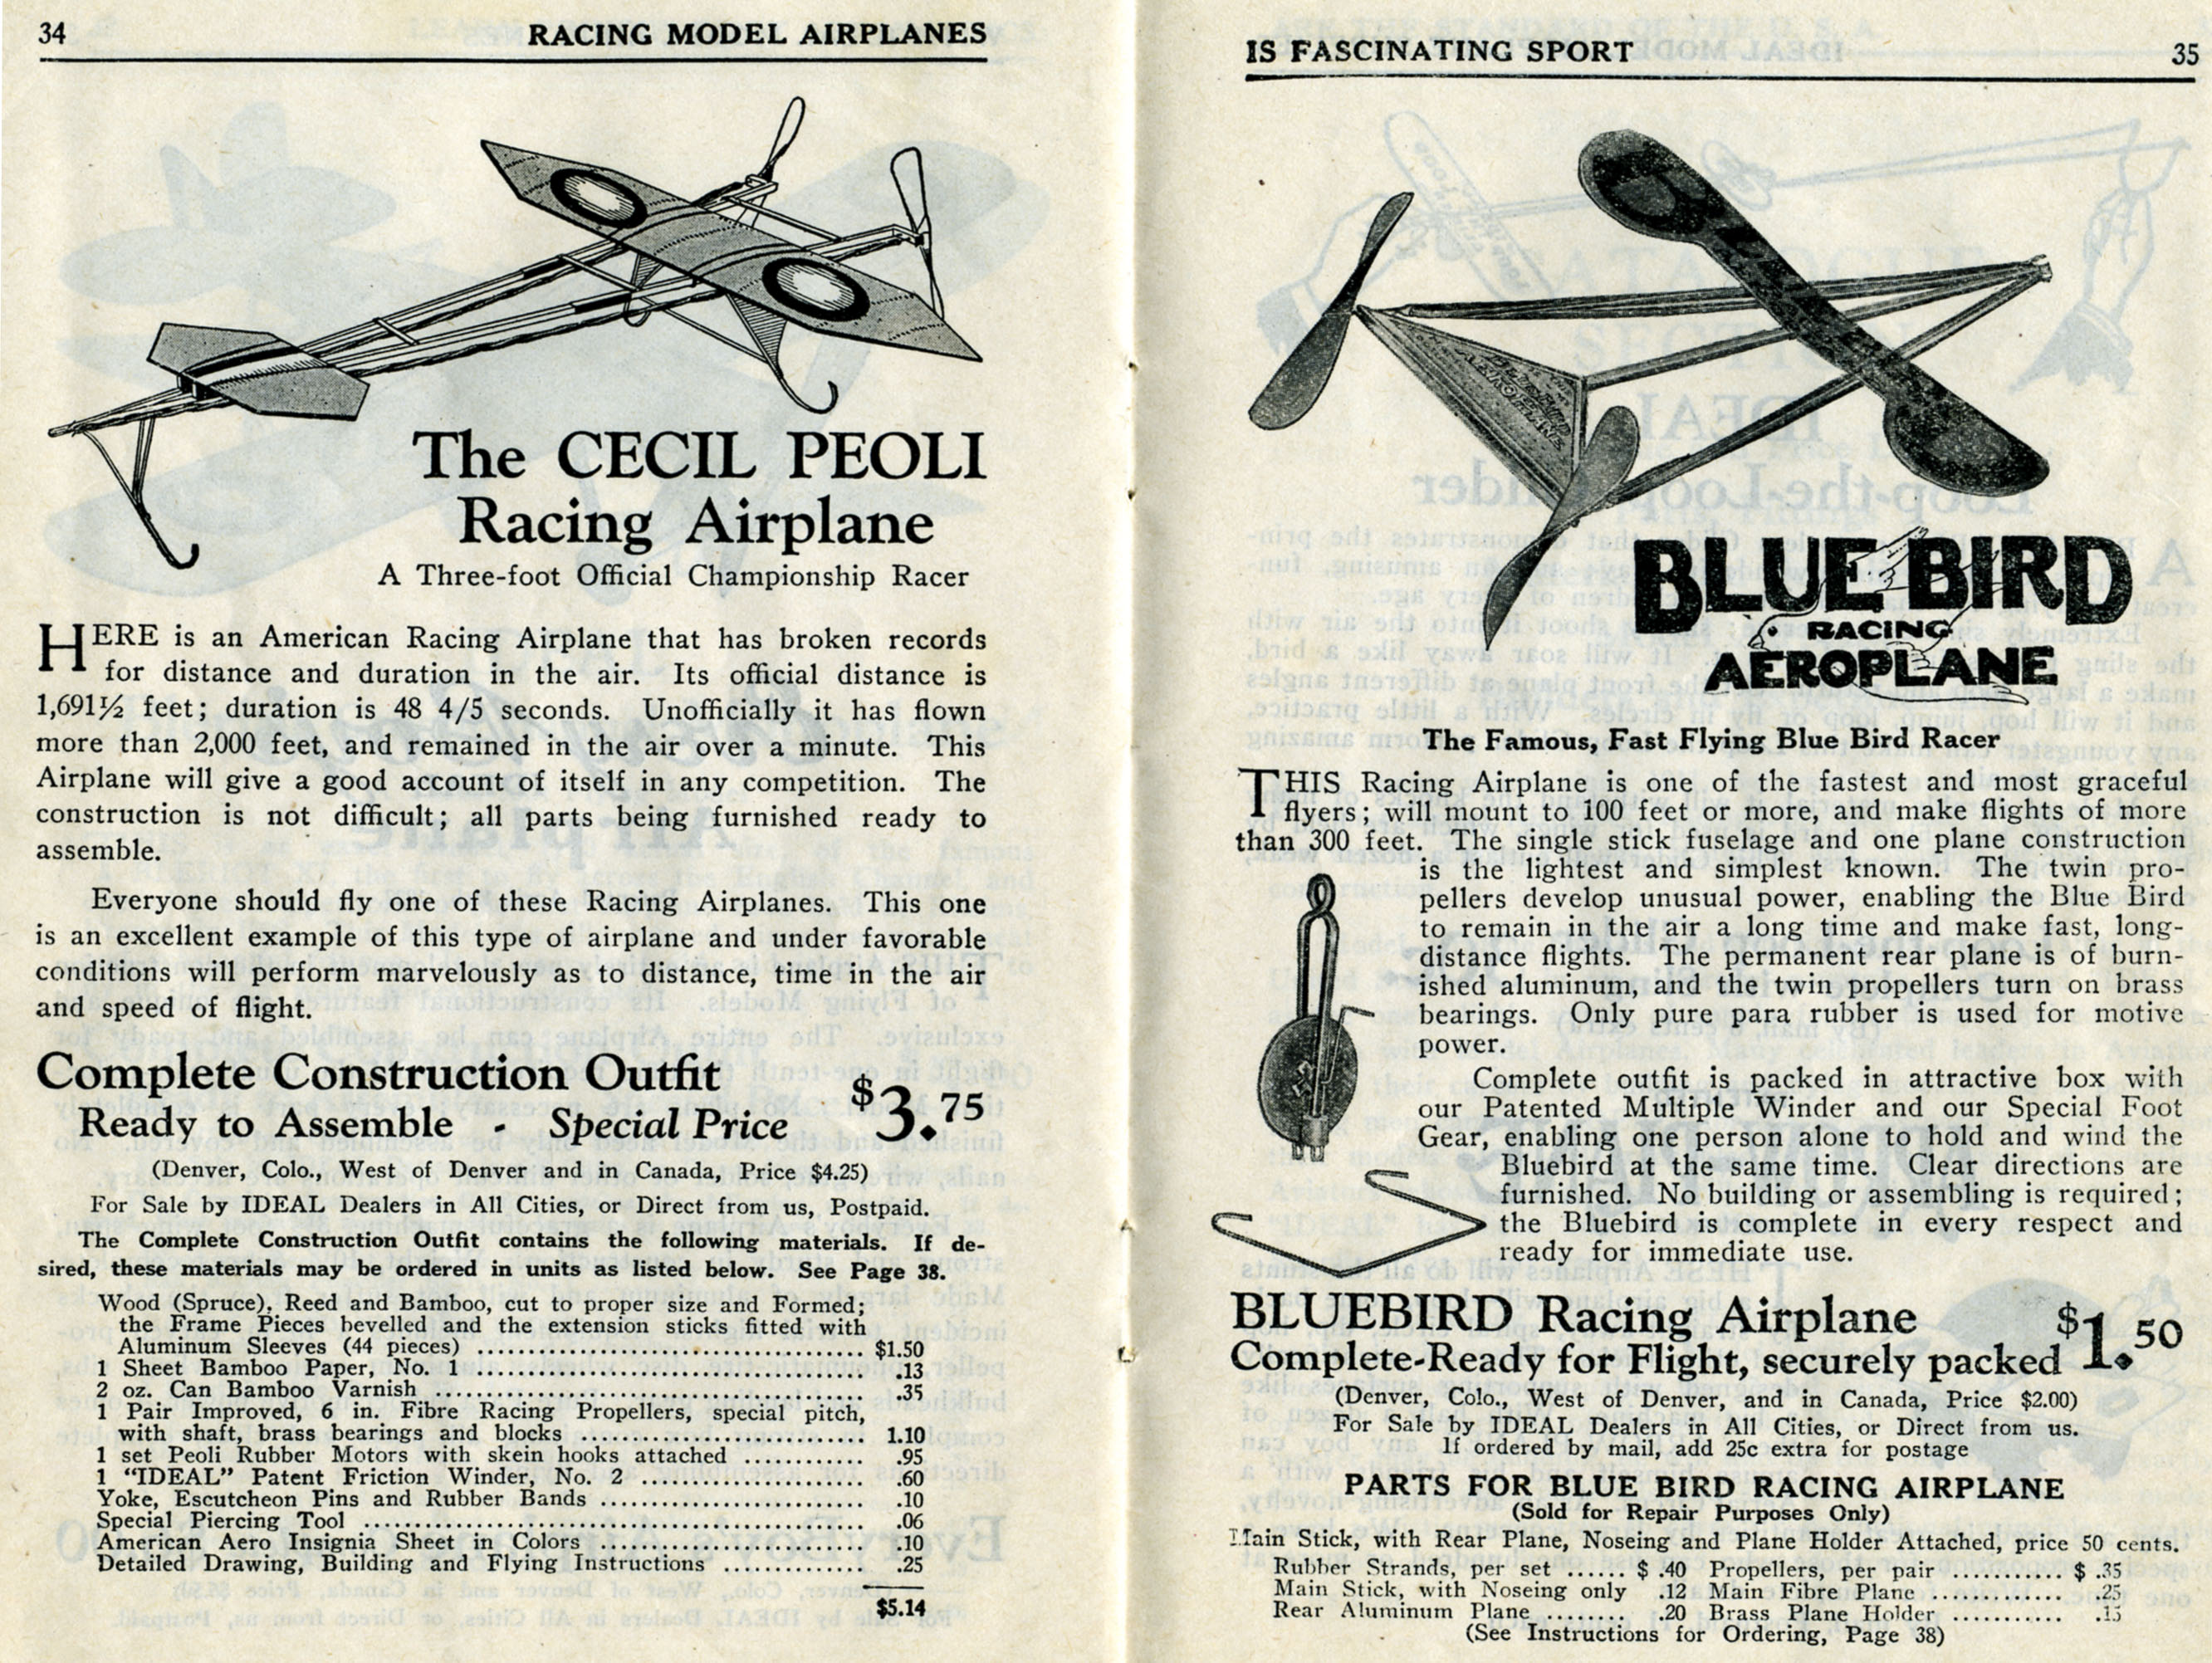 Catalog, How to Build and Fly Model Airplanes: Catalogue of Ideal Supplies for Model Airplane Builders, pages 34 and 34, 1928. (Source: National Model Aviation Museum Archives, Collection #0043)